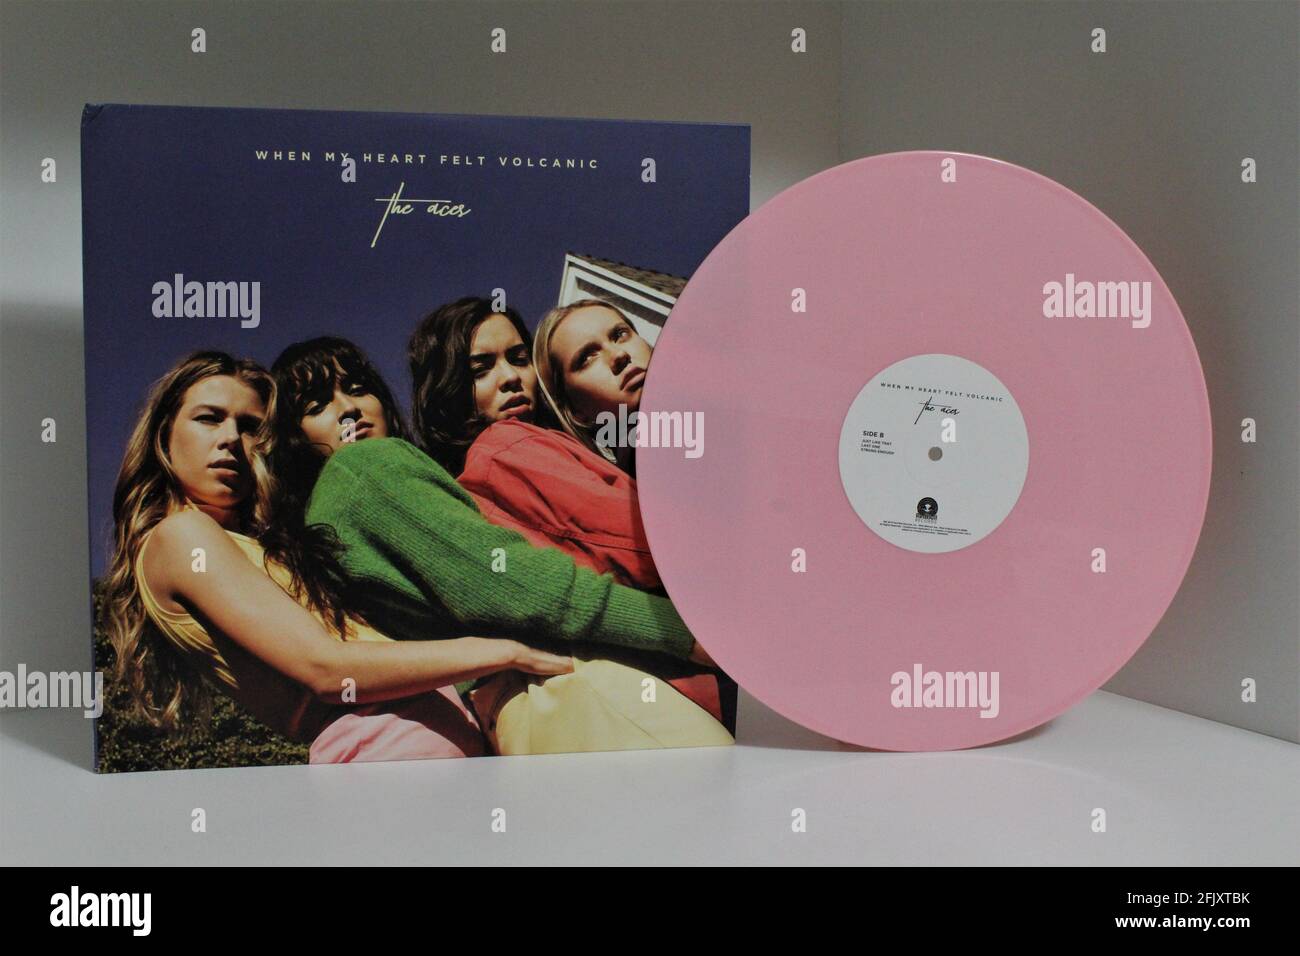 All girl indie rock band, The Aces, music album on vinyl record LP disc. Stock Photo